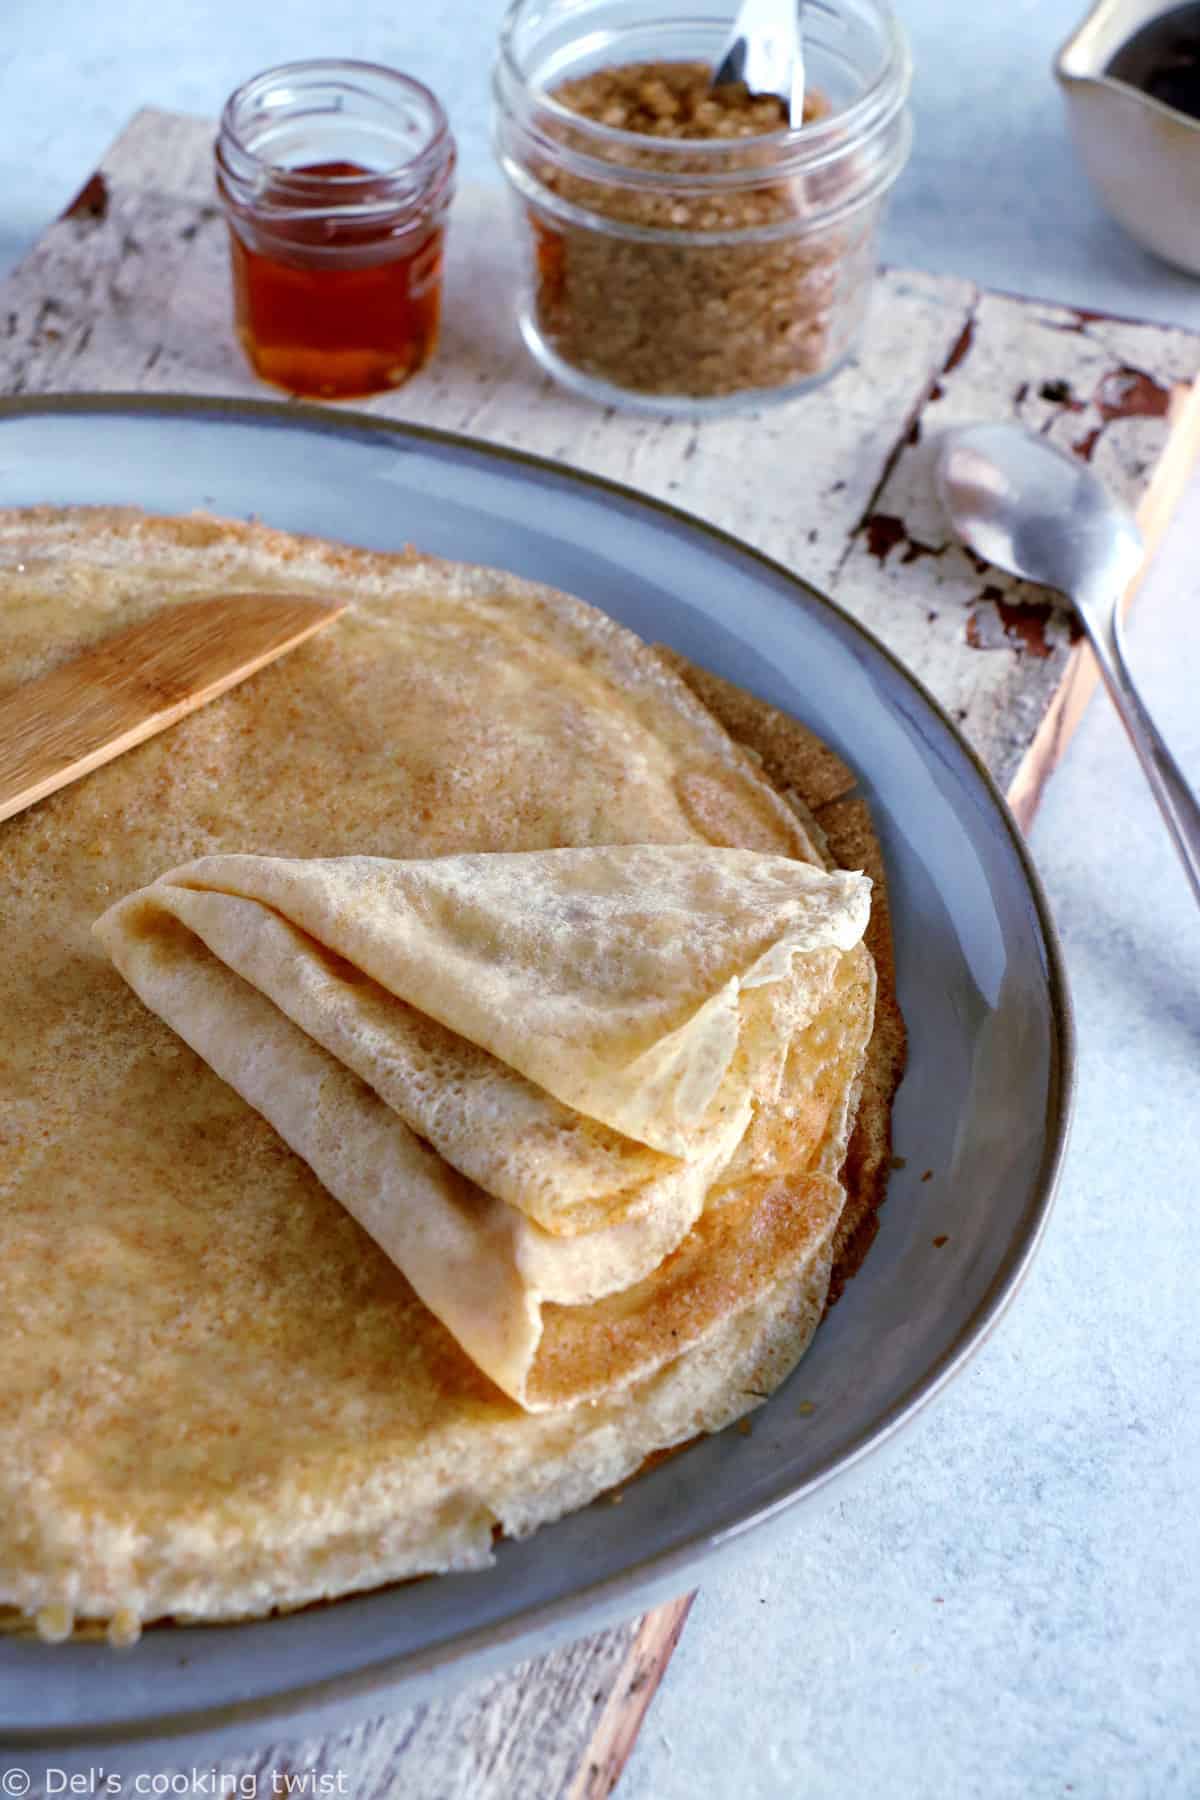 Spelt flour crepes are easy to make, with a perfect thin, light and supple texture and a mild, nutty flavor.